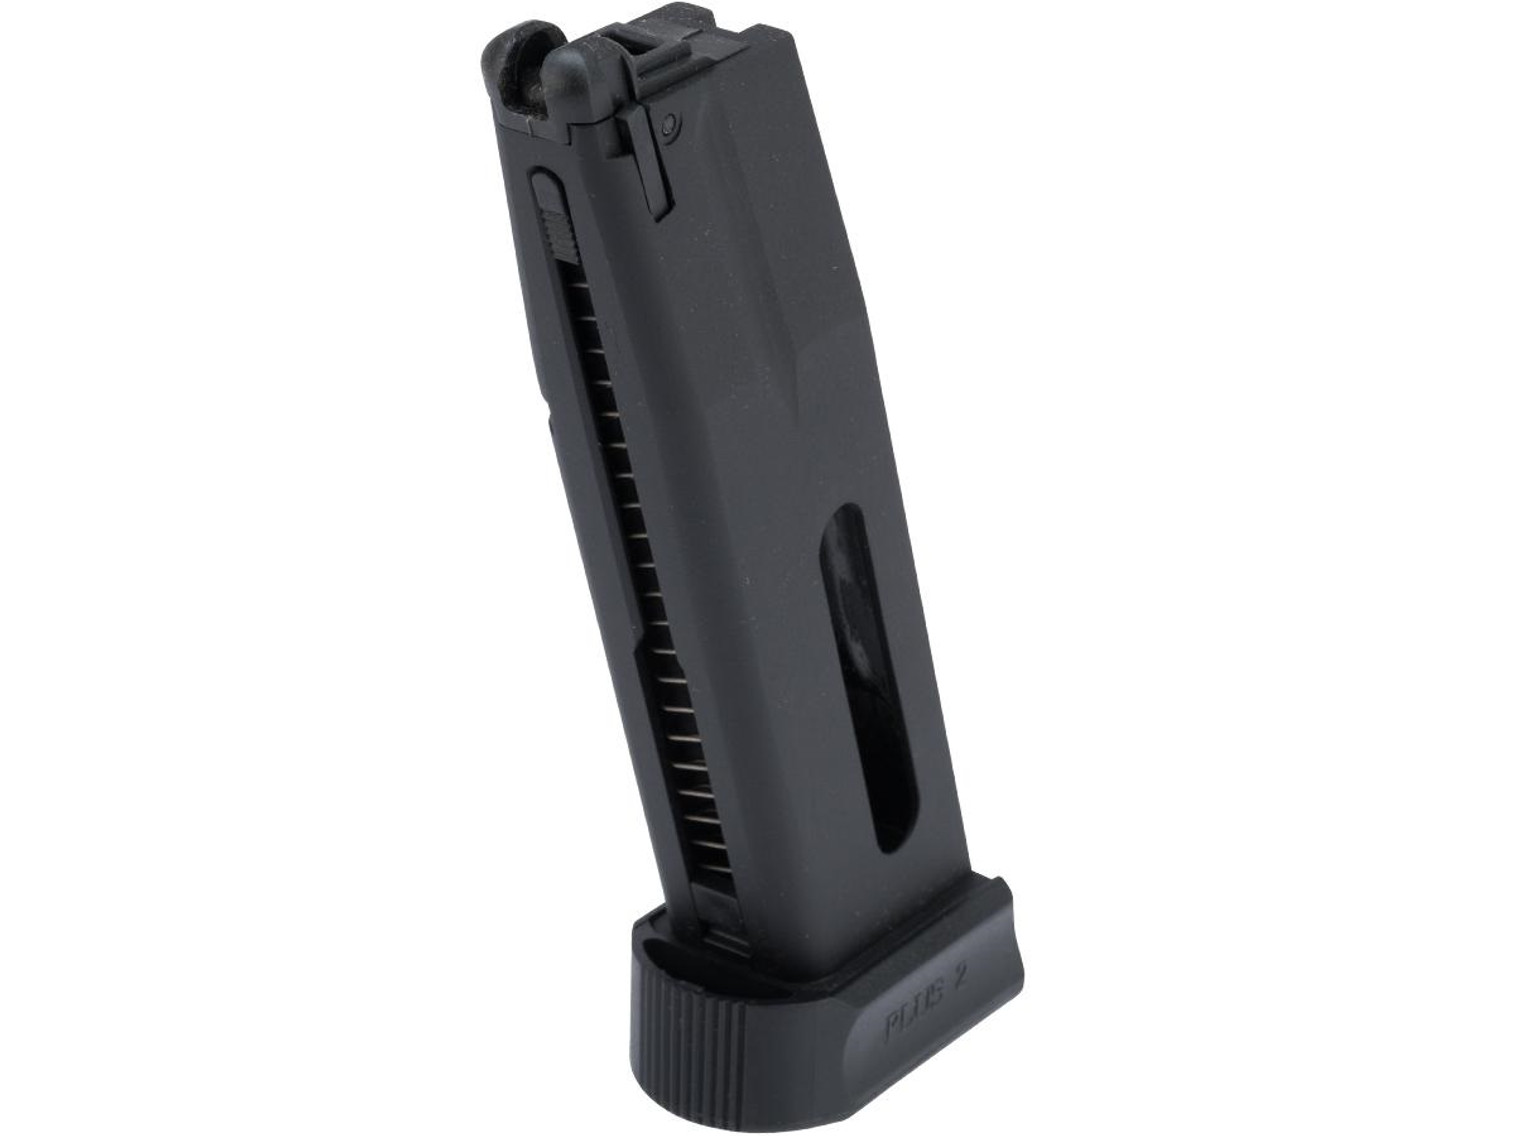 ASG 26 Round Magazine for CZ Shadow 2 Gas Blowback Airsoft Pistol (Type: CO2)